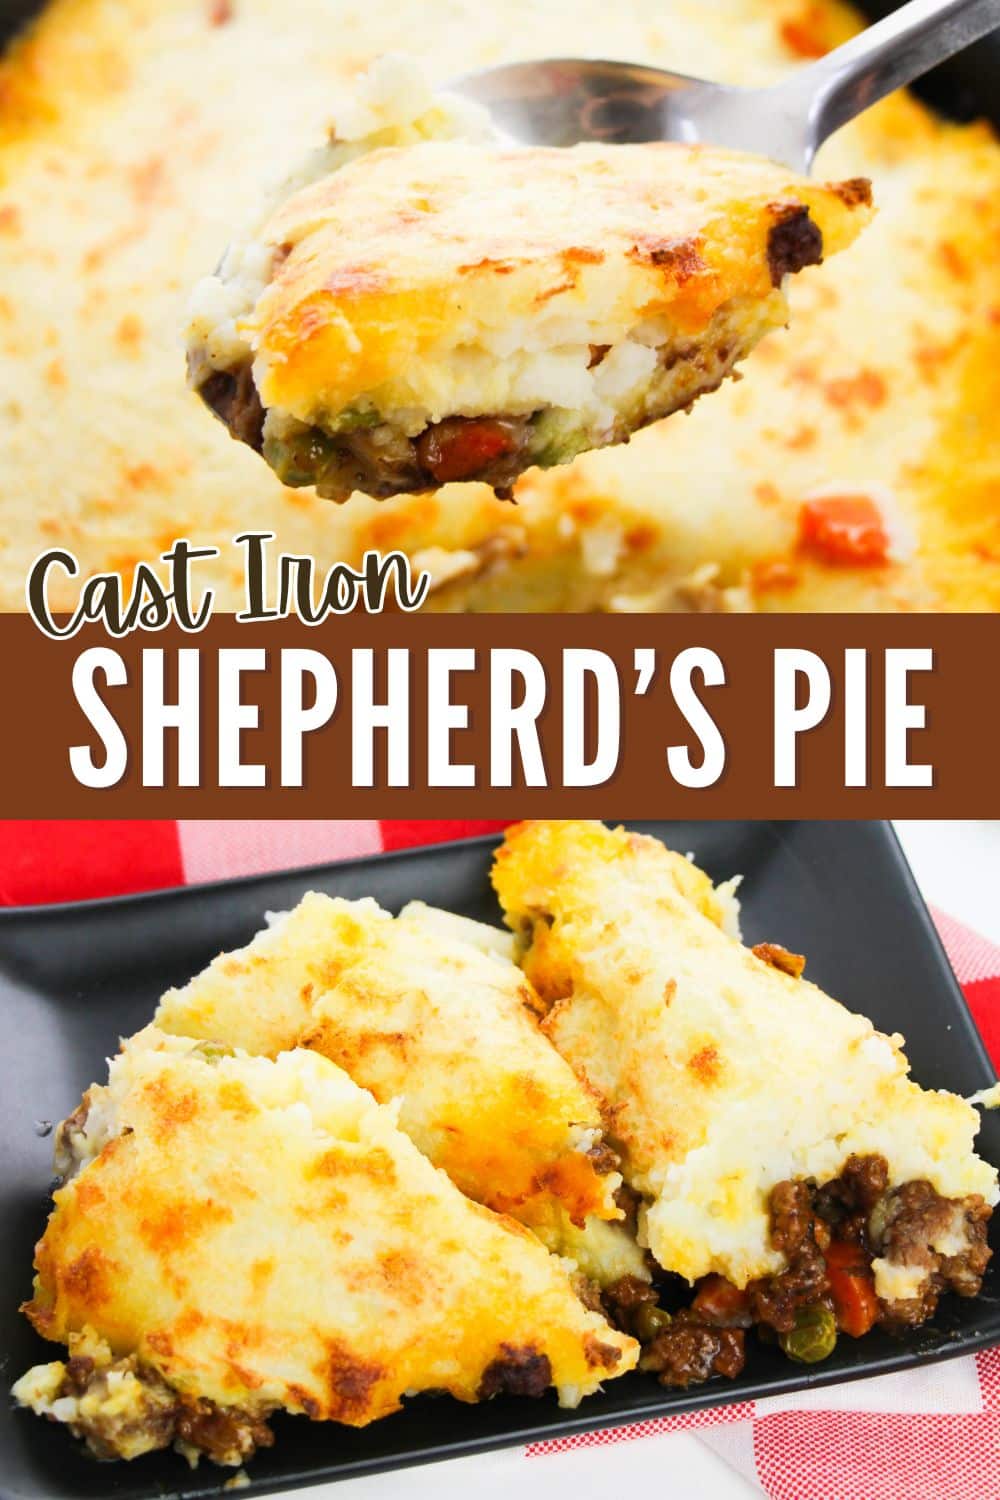 A mouthwatering shepherd's pie cooked and served in a traditional cast iron skillet.